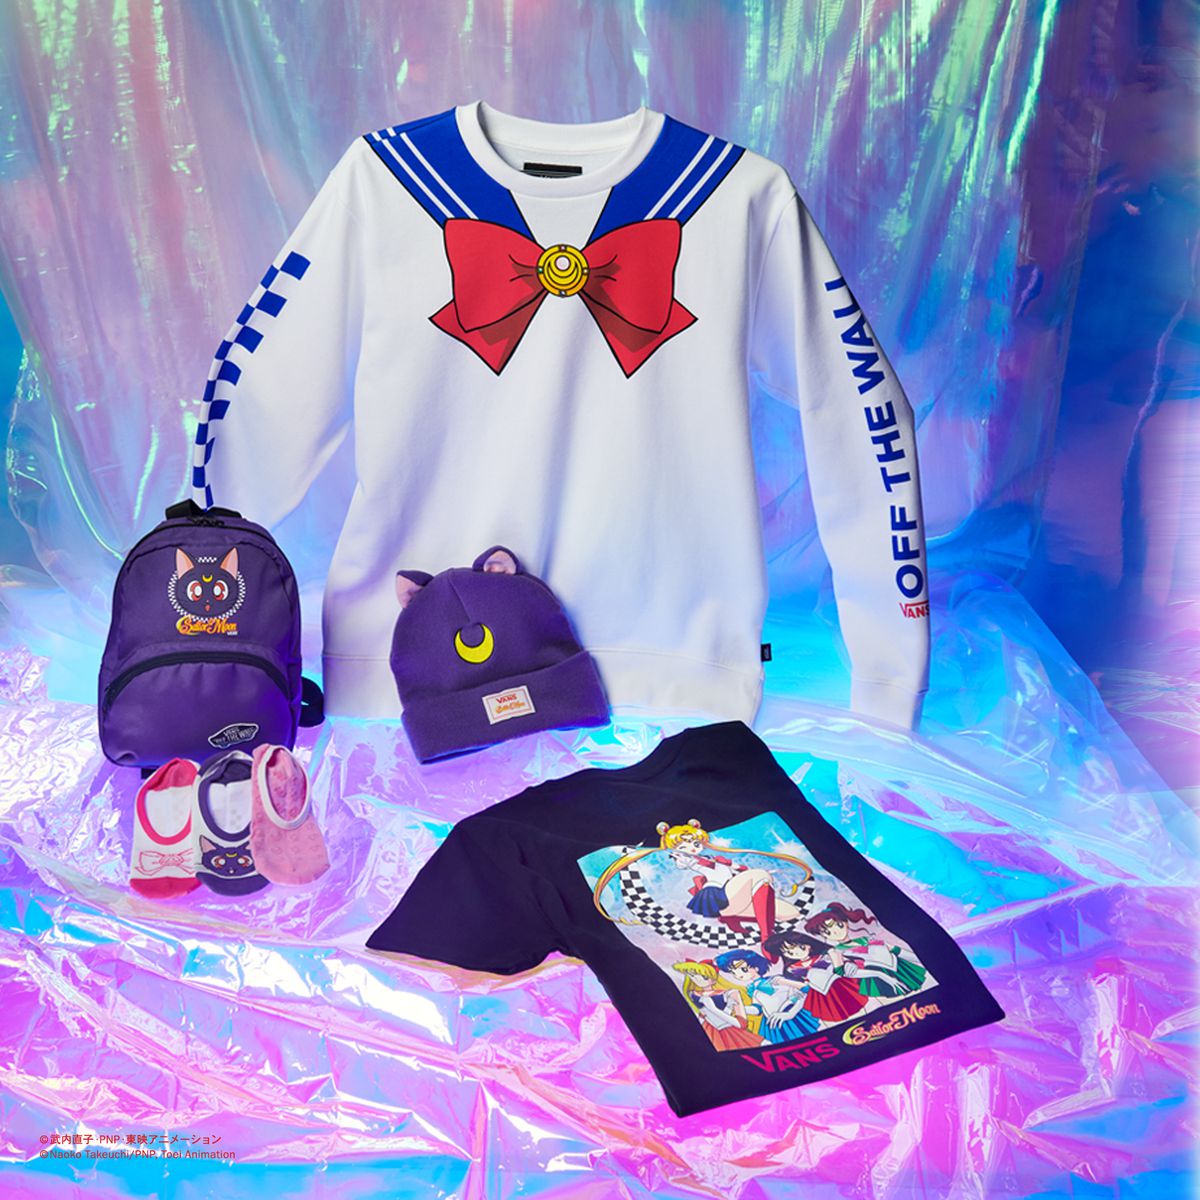 A long sleeve shirt with a design that looks like a Sailor Guardian, a backpack, a T-shirt, and a beanie